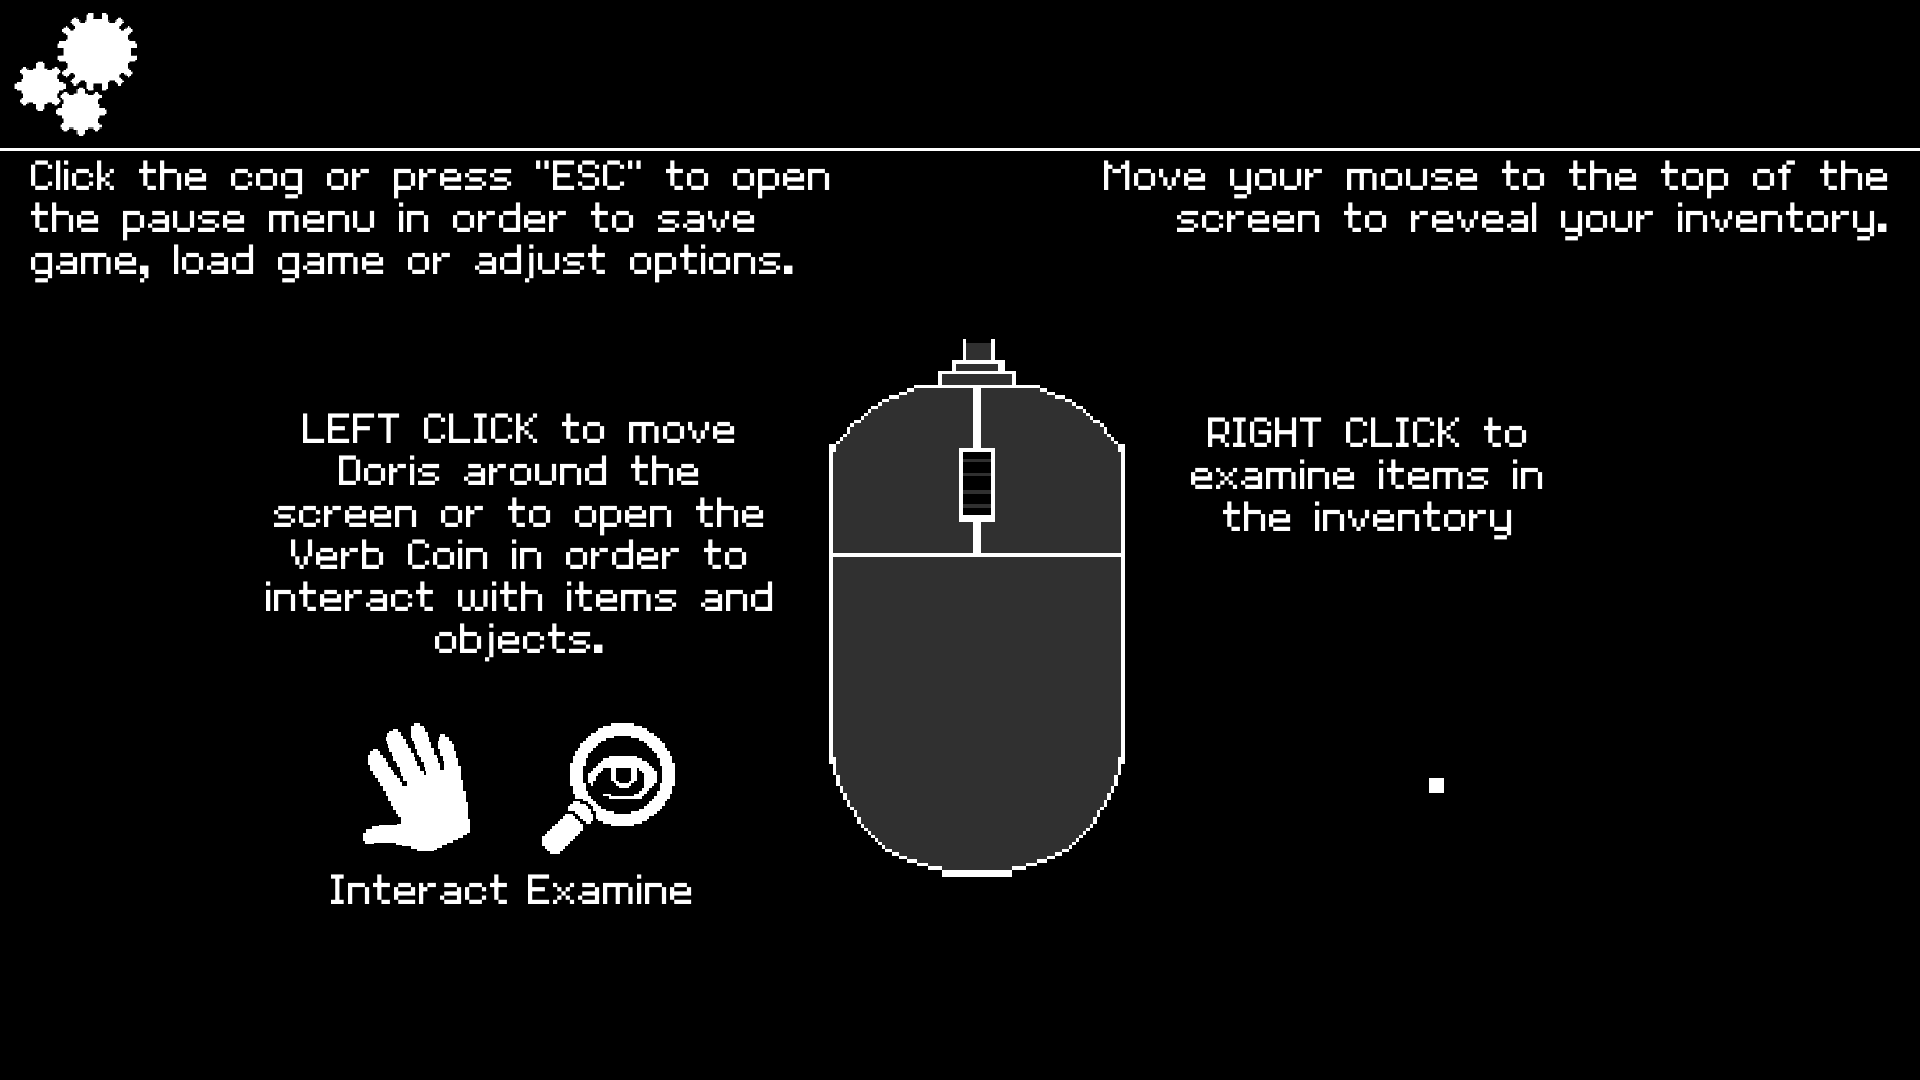 illustration of the controls overlay